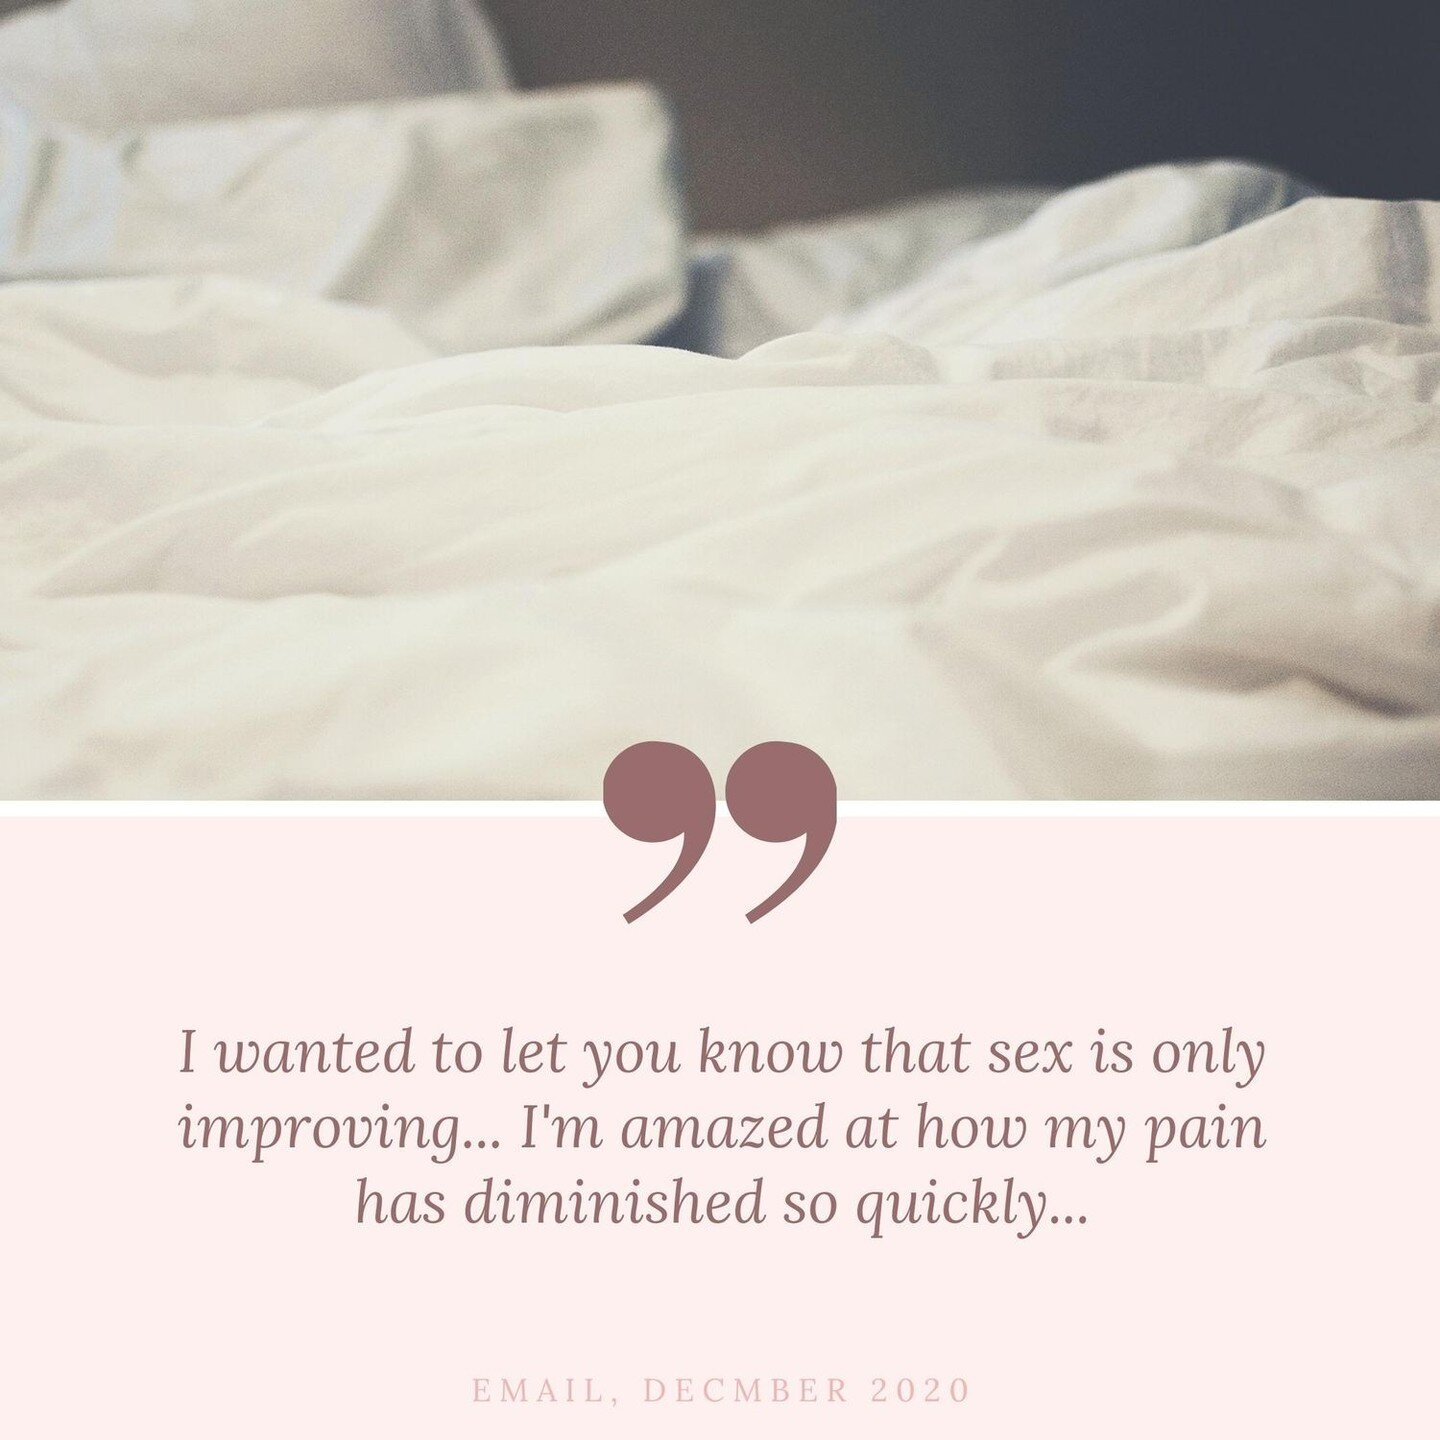 From a patient testimonial regarding treatment for painful intercourse, which can be common in women with endometriosis, peri-menopausal women and in other instances as well.

&quot;I wanted to let you know that sex is only improving... I'm amazed at